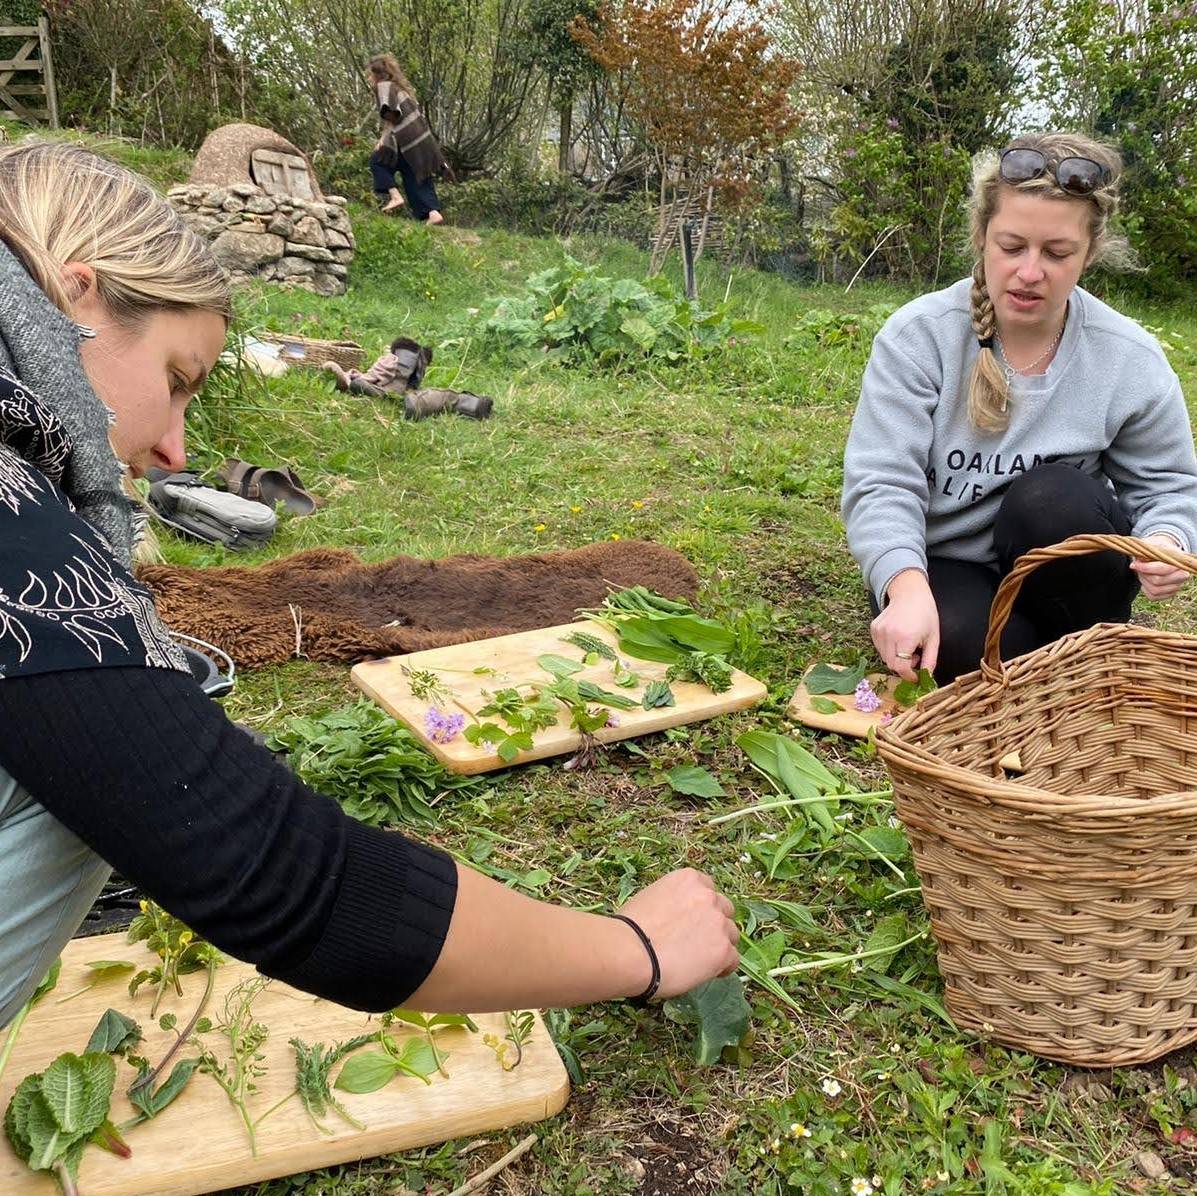 Two women kneeling in a garden with chopping boards and foraged plants